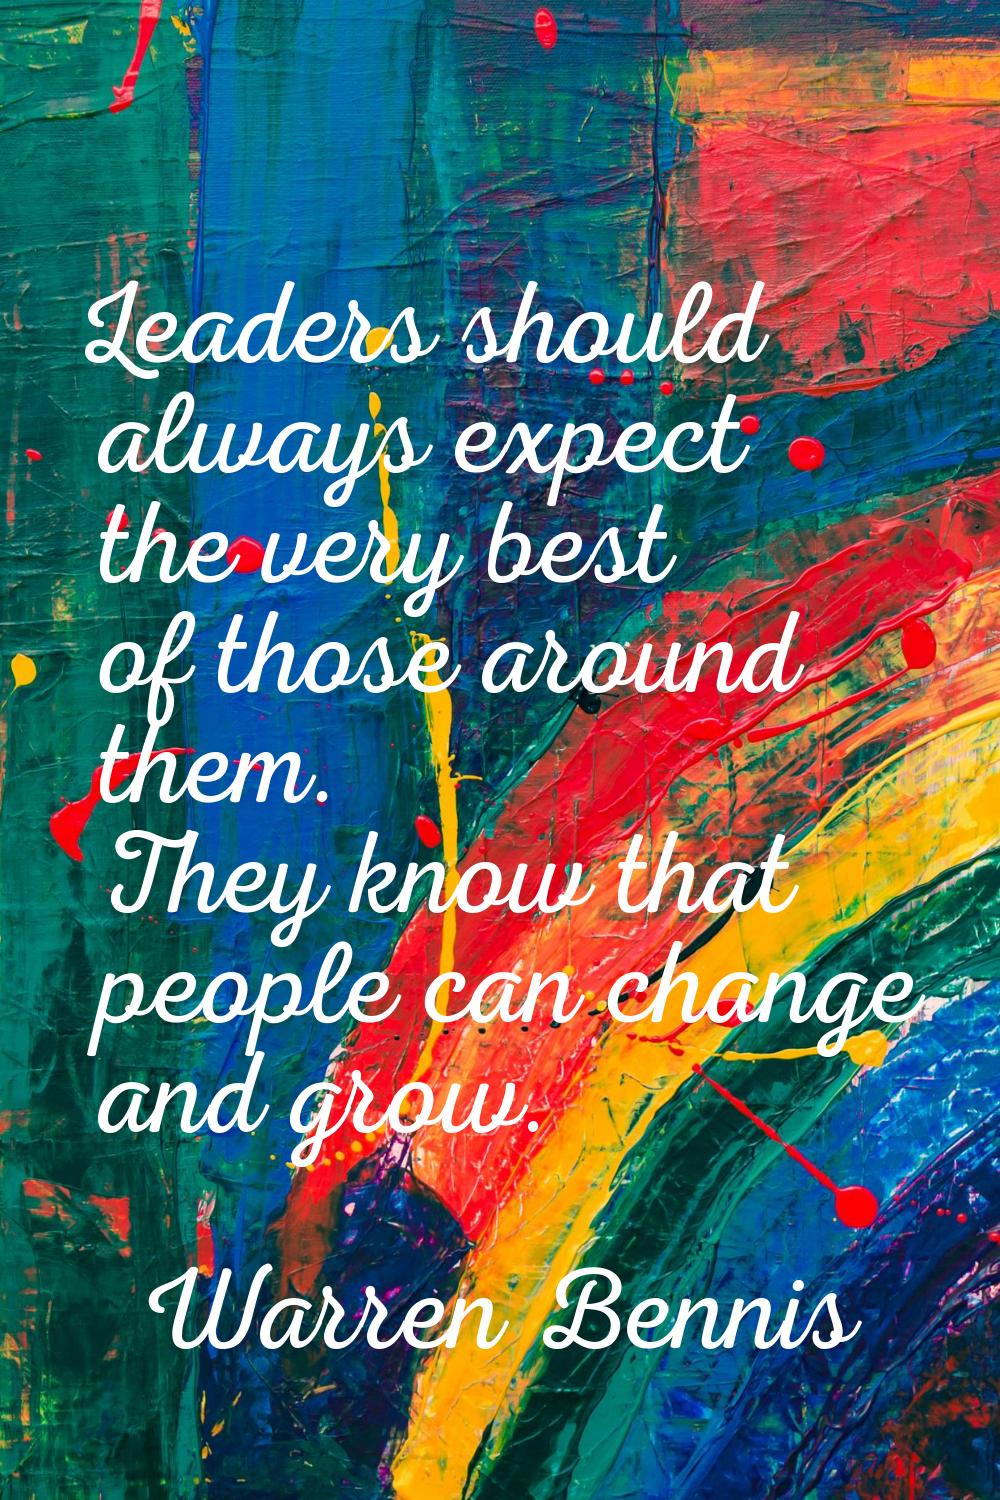 Leaders should always expect the very best of those around them. They know that people can change a